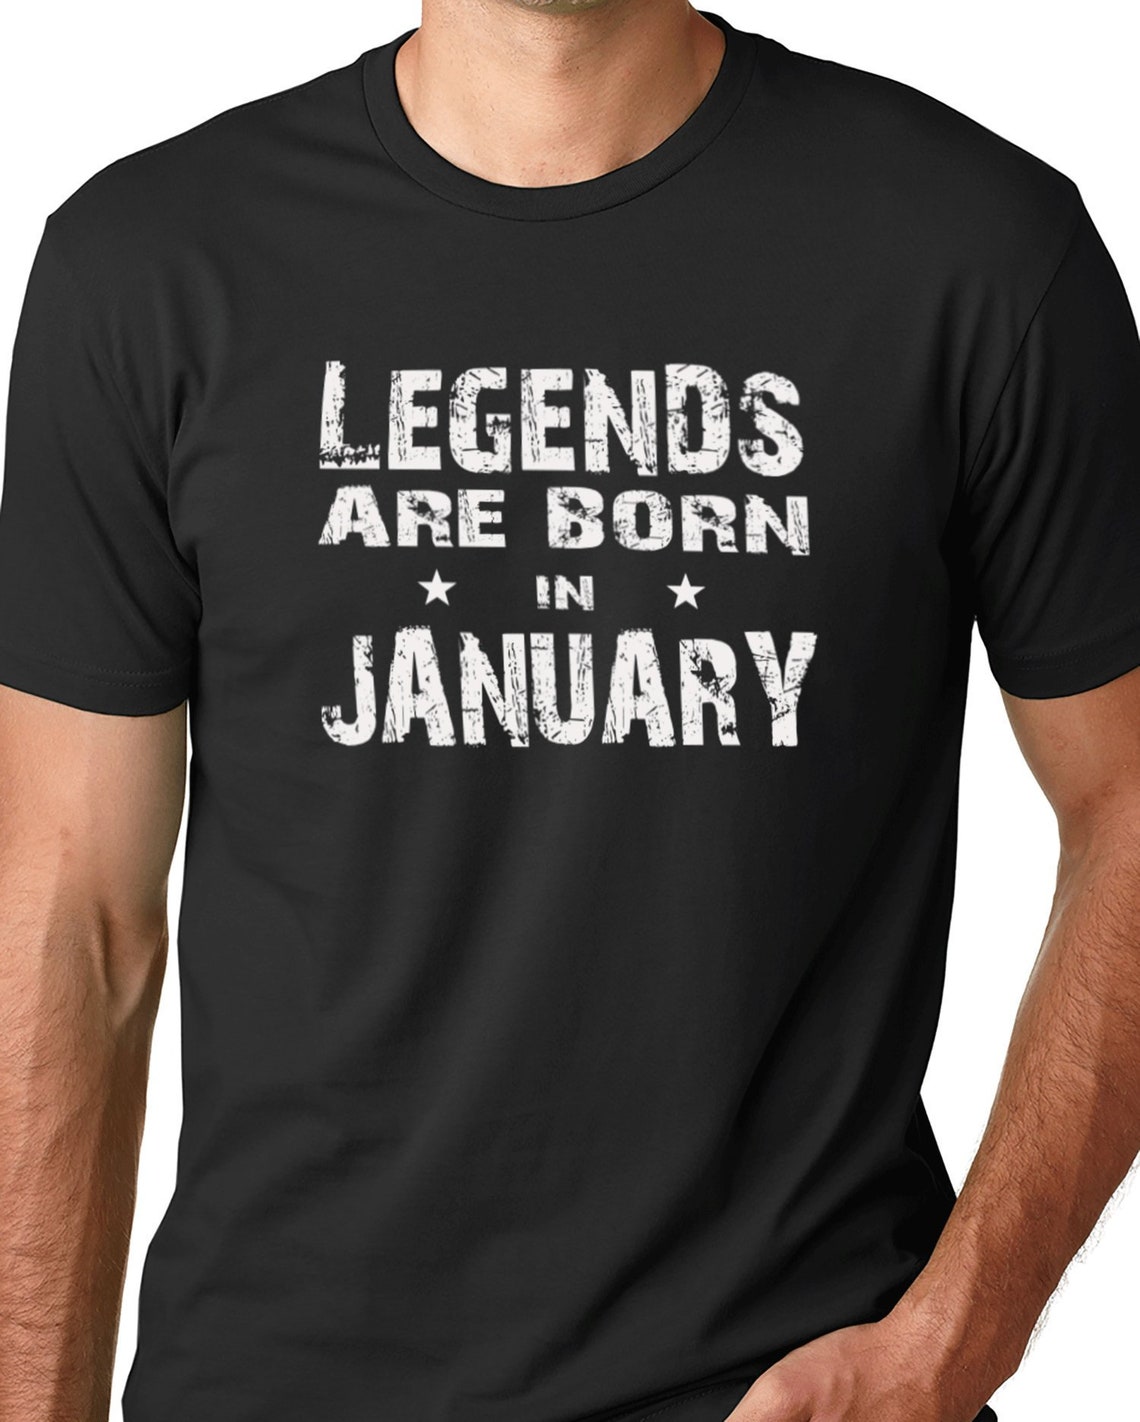 Legends are Born in January Funny Shirts for Men